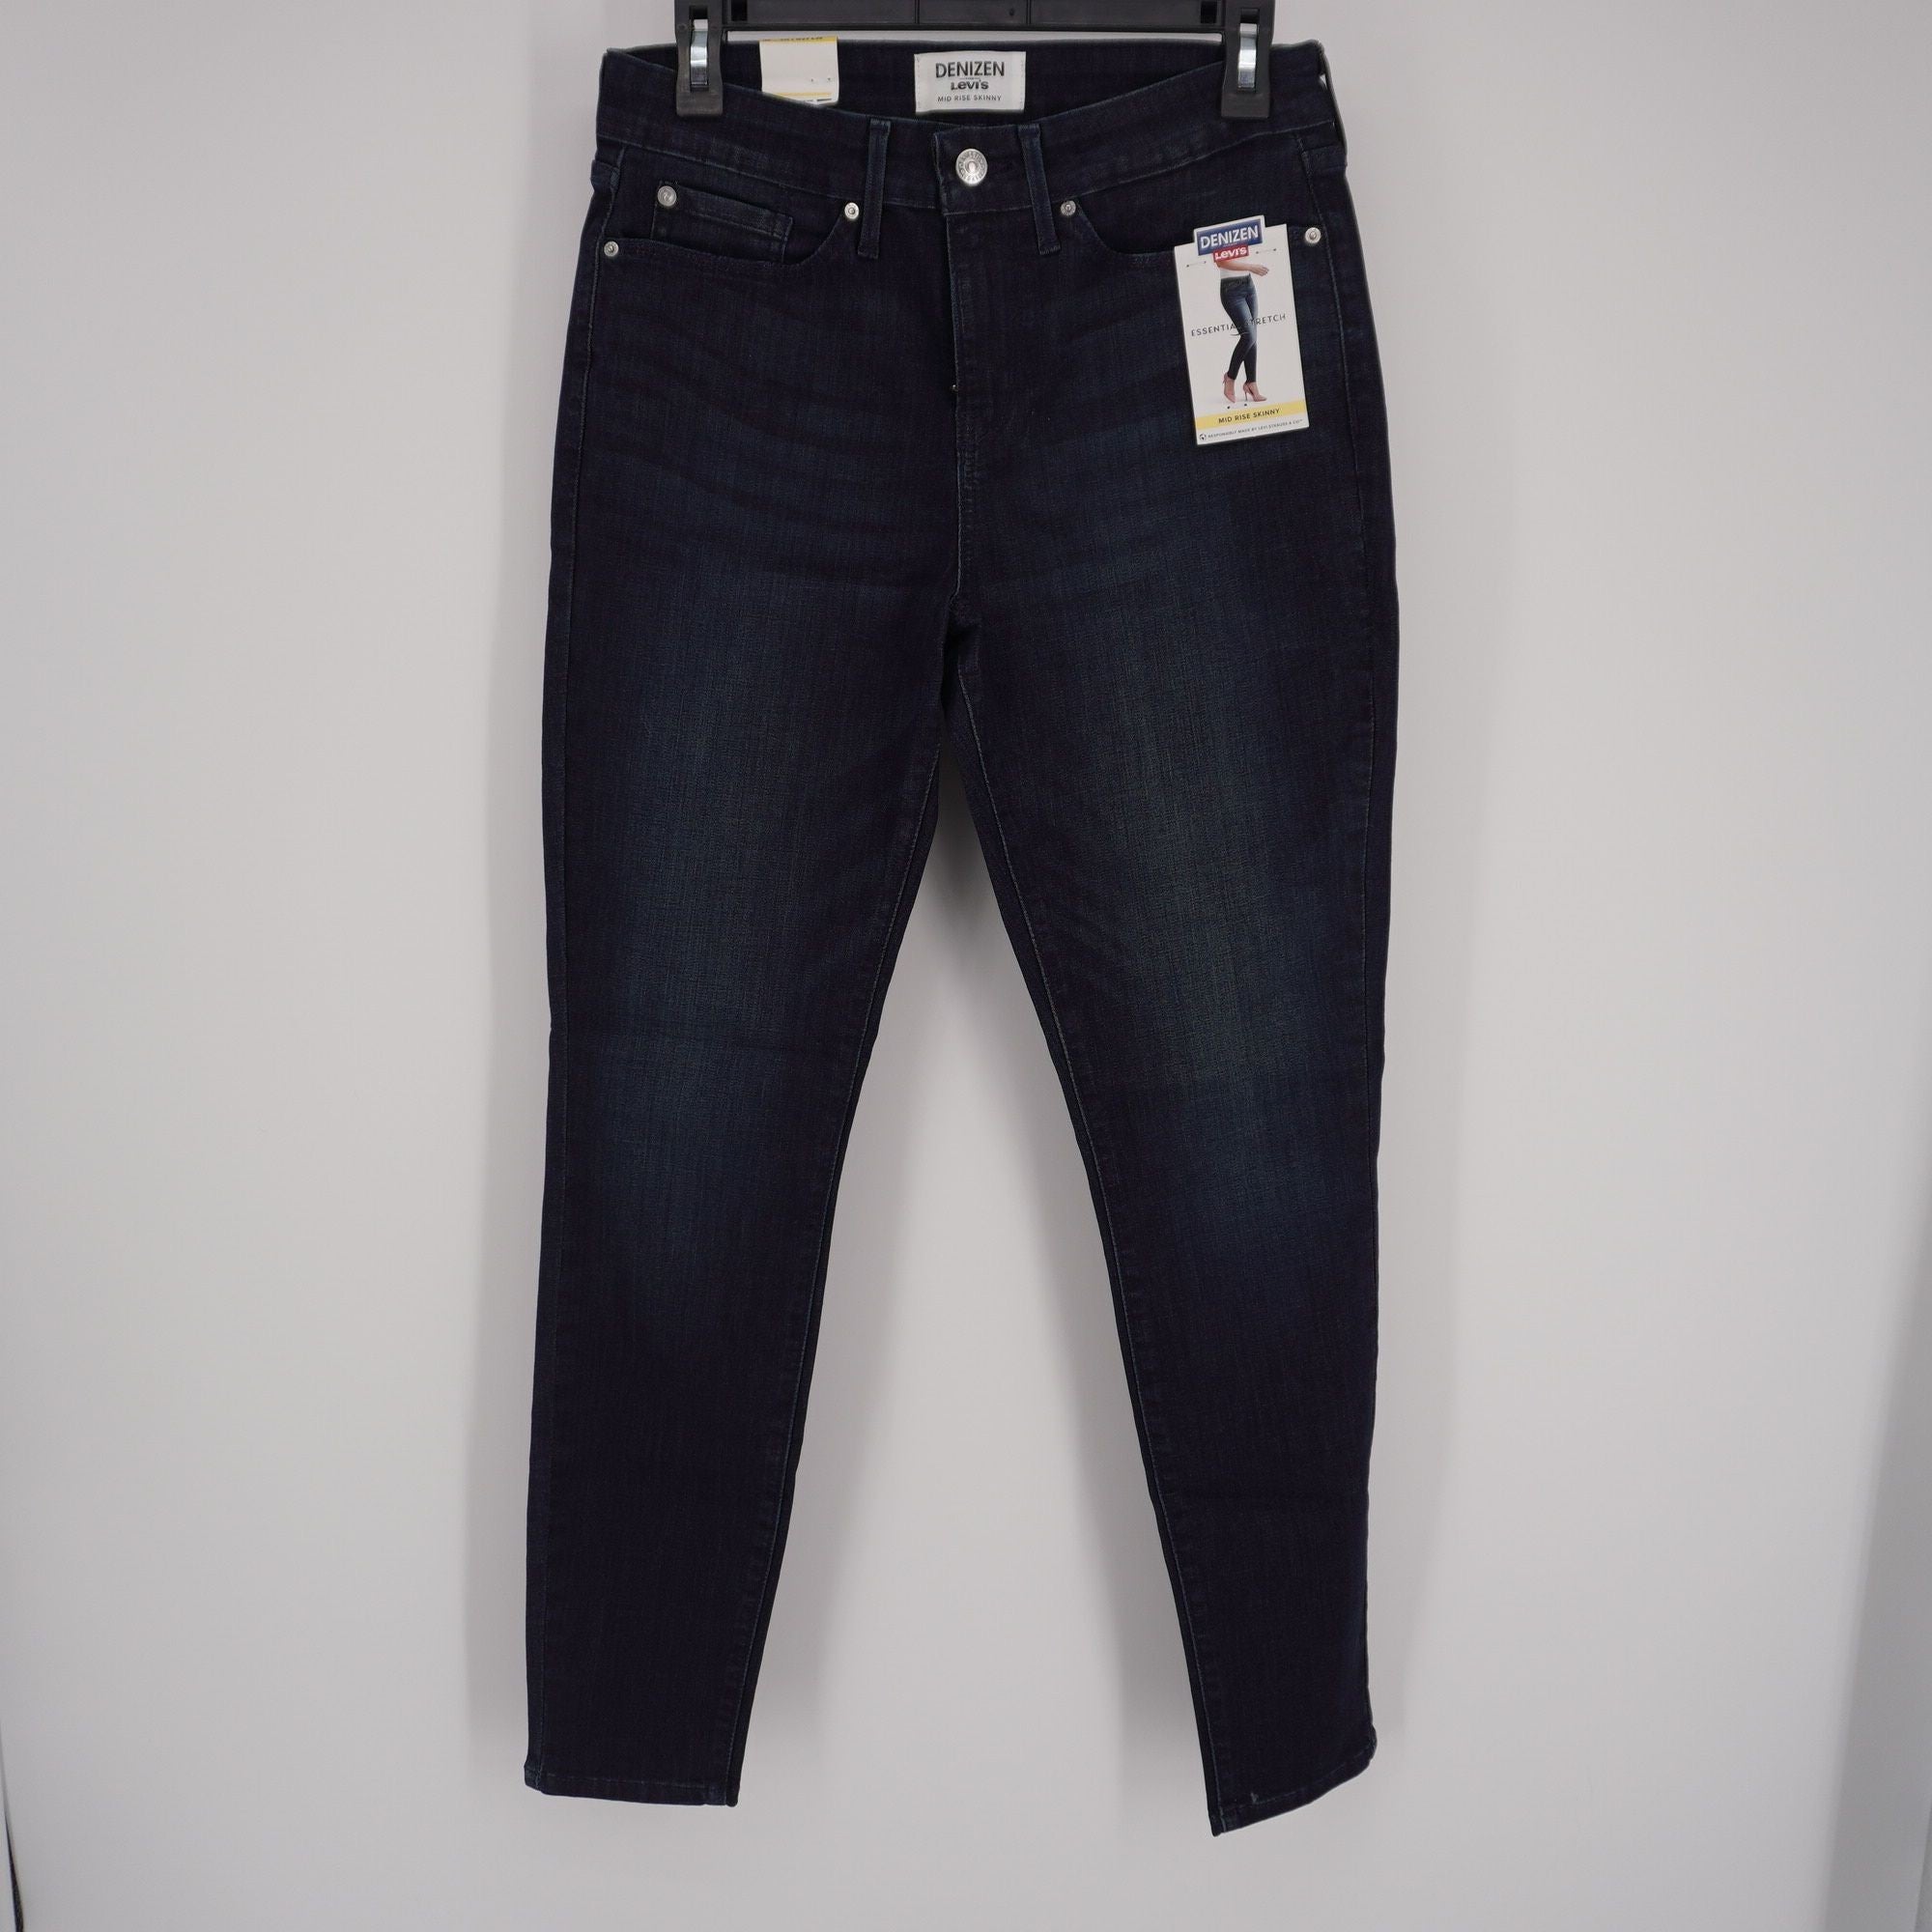 Denizen from Levi's NWT Mid Rise Skinny Dark Wash Jeans – Two Soul Sisters  Resale